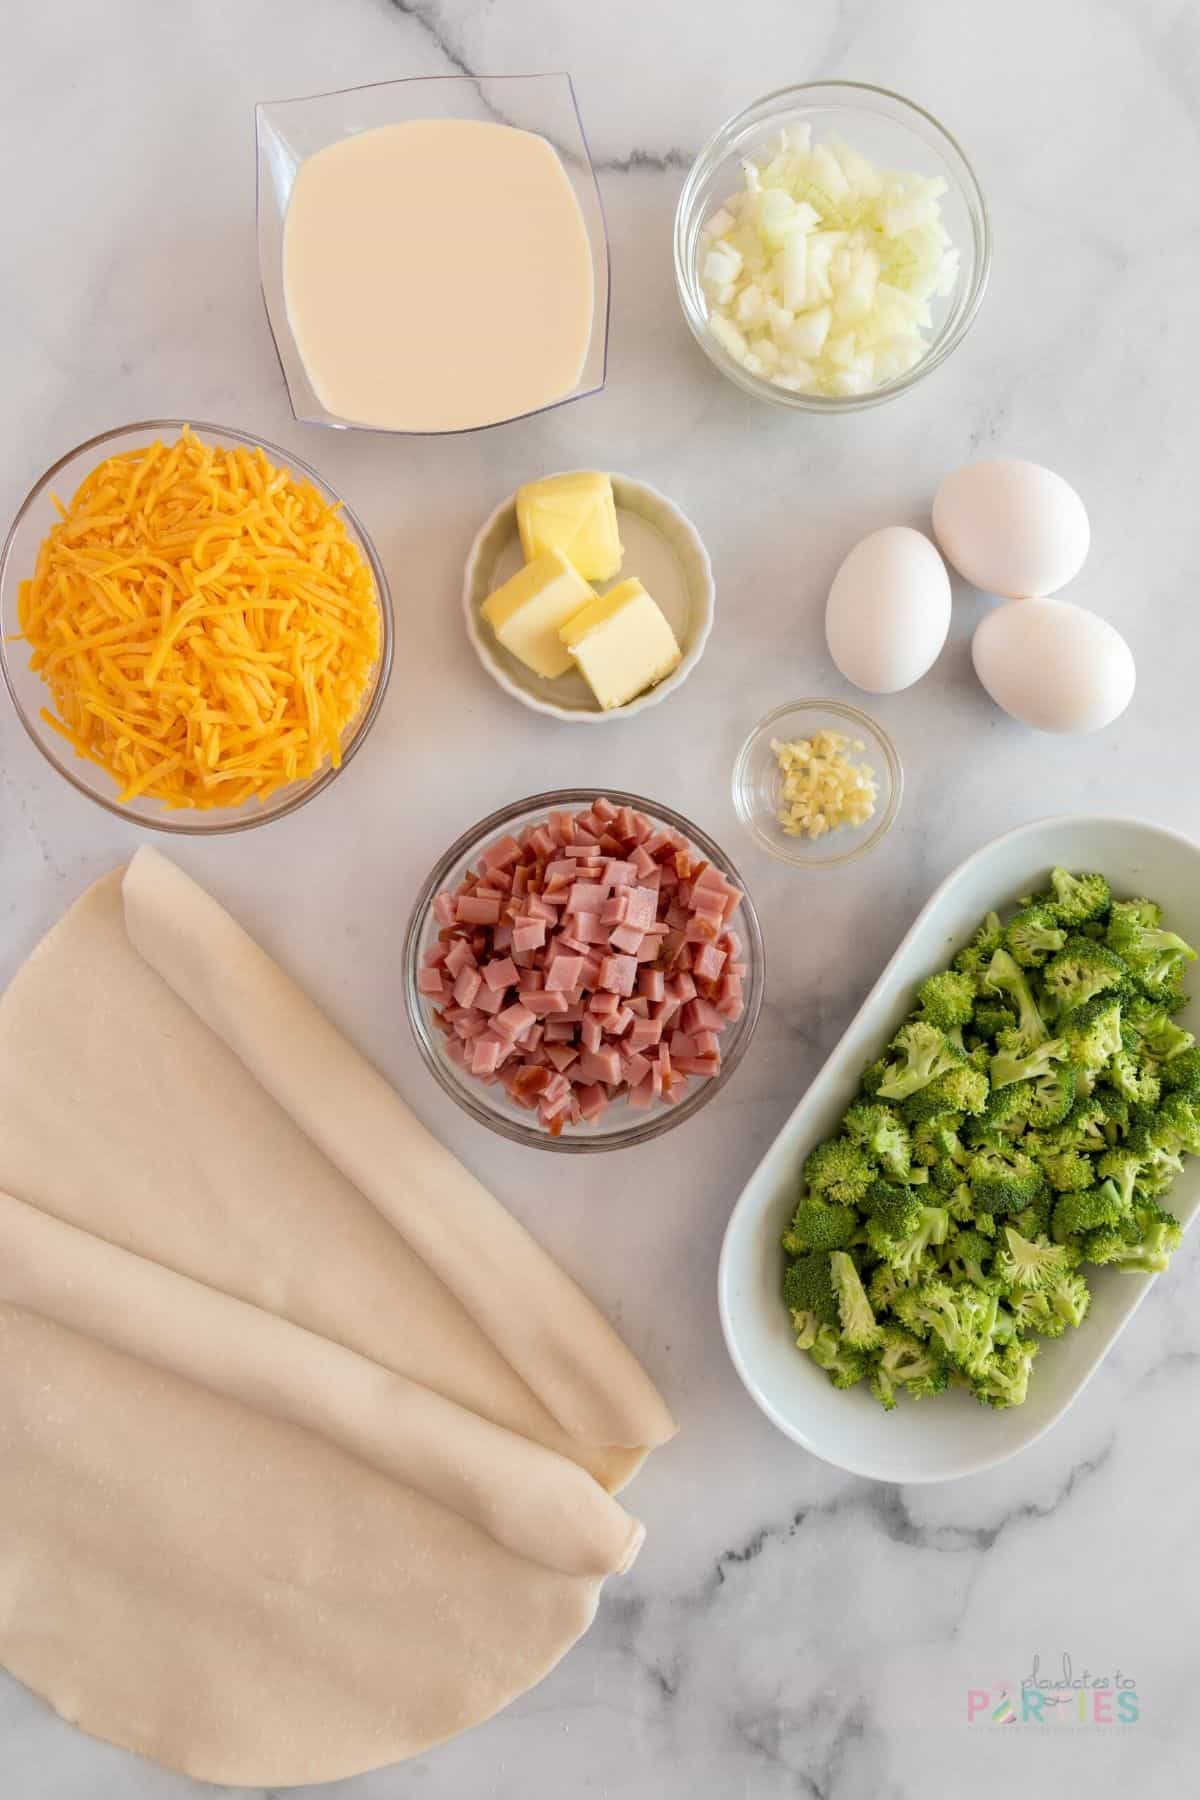 Ingredients for ham and broccoli quiche.